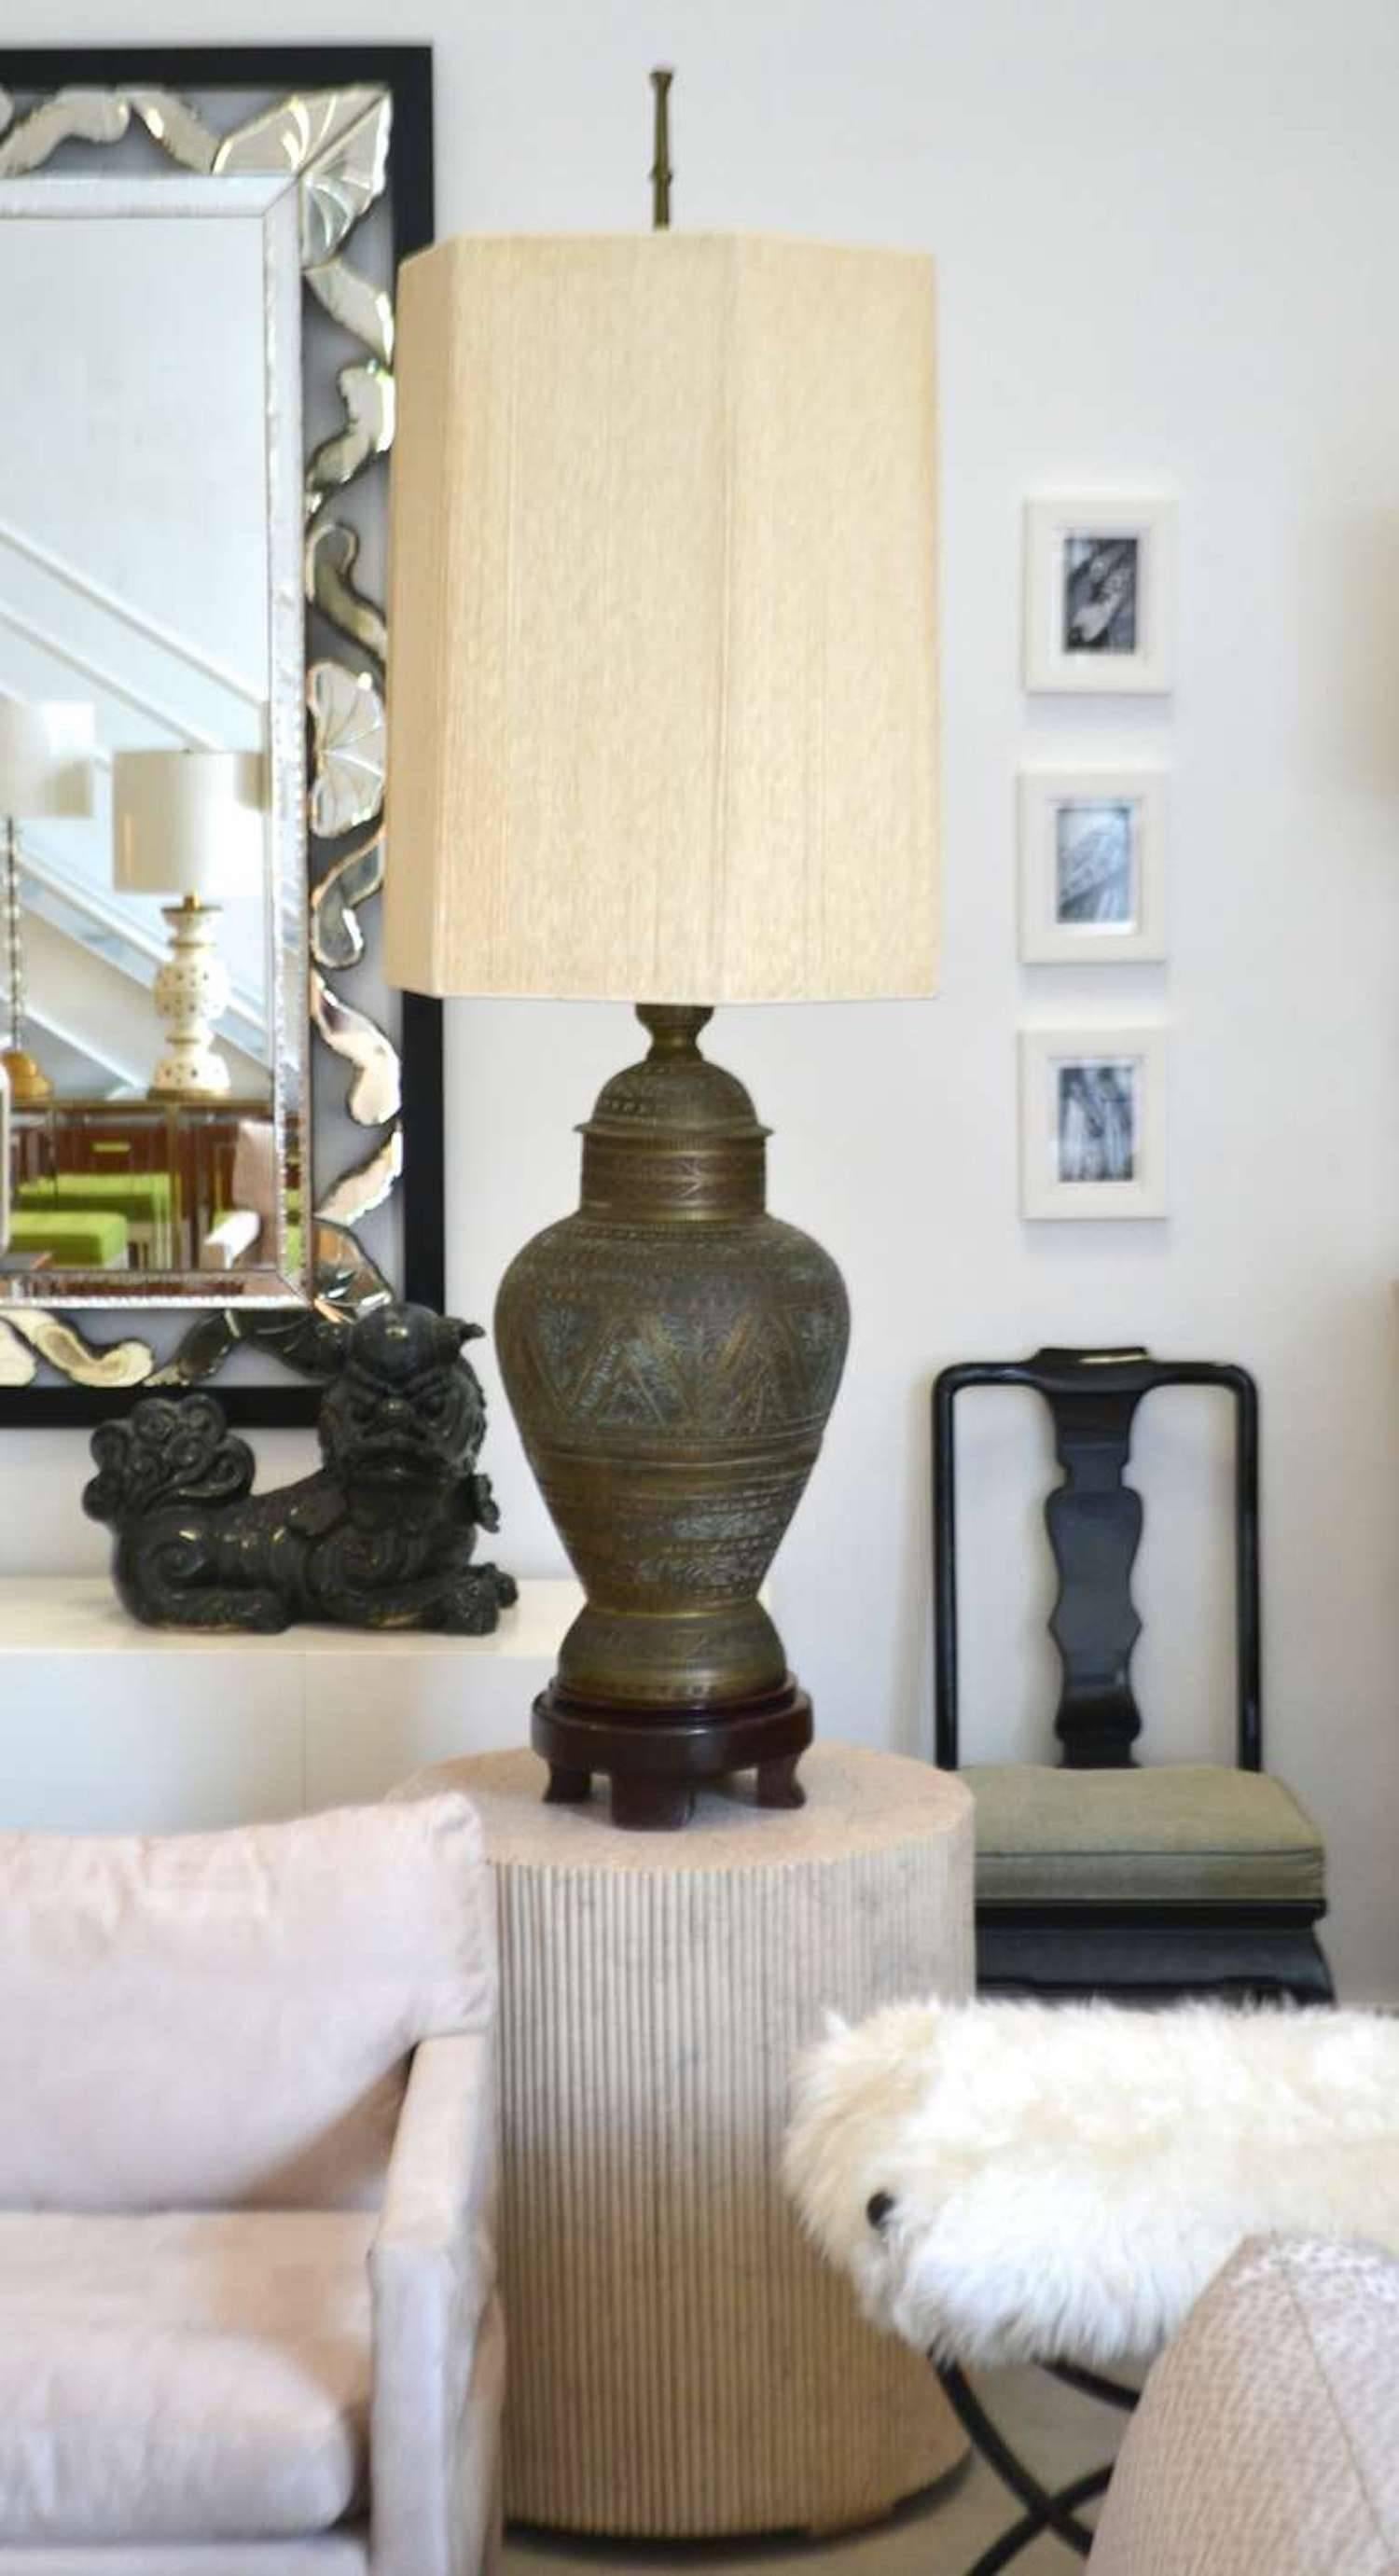 Stunning bronze table lamp in the manner of James Mont, circa 1940s-1950s. This exquisite and highly decorative lamp with ottoman Empire style detailing is mounted on a footed mahogany base. Shade not included.

Measurements: 
Form is 34